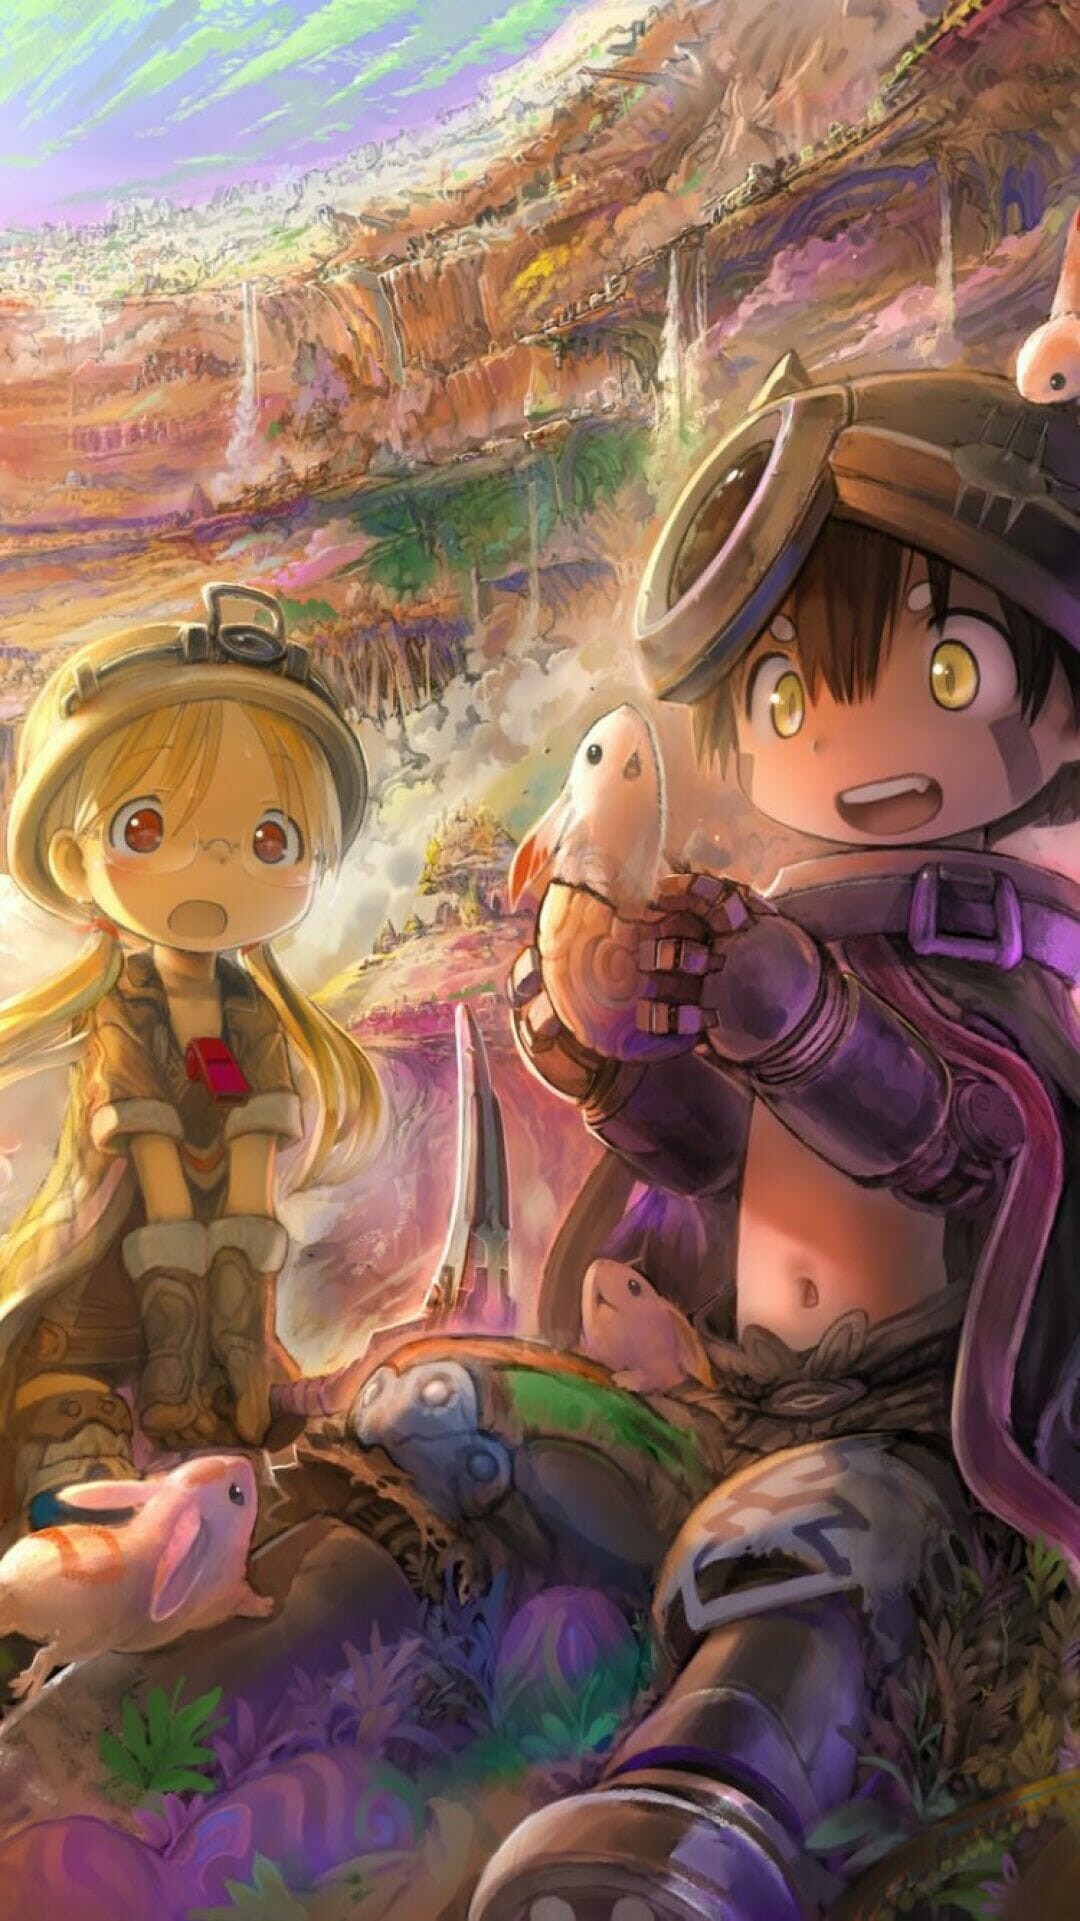 Made in Abyss (TV Series): Two compilation films were released on January 4, 2019 and January 18, 2019. 1080x1930 HD Wallpaper.